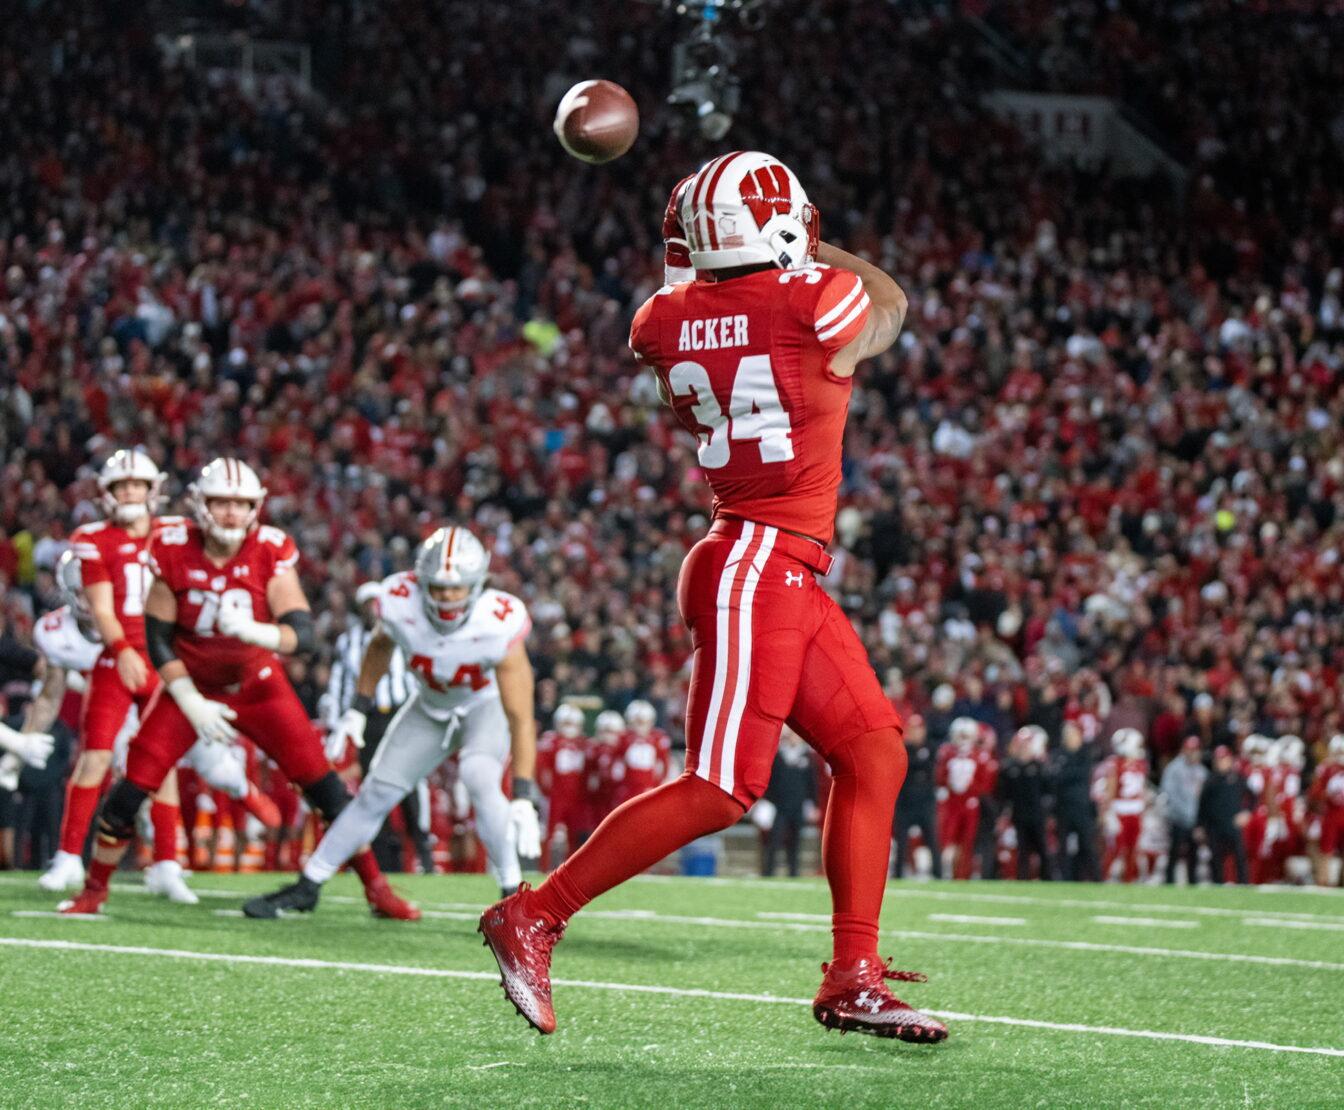 Football%3A+Wisconsin+falls+to+LSU+in+ReliaQuest+Bowl+to+kick+off+new+year